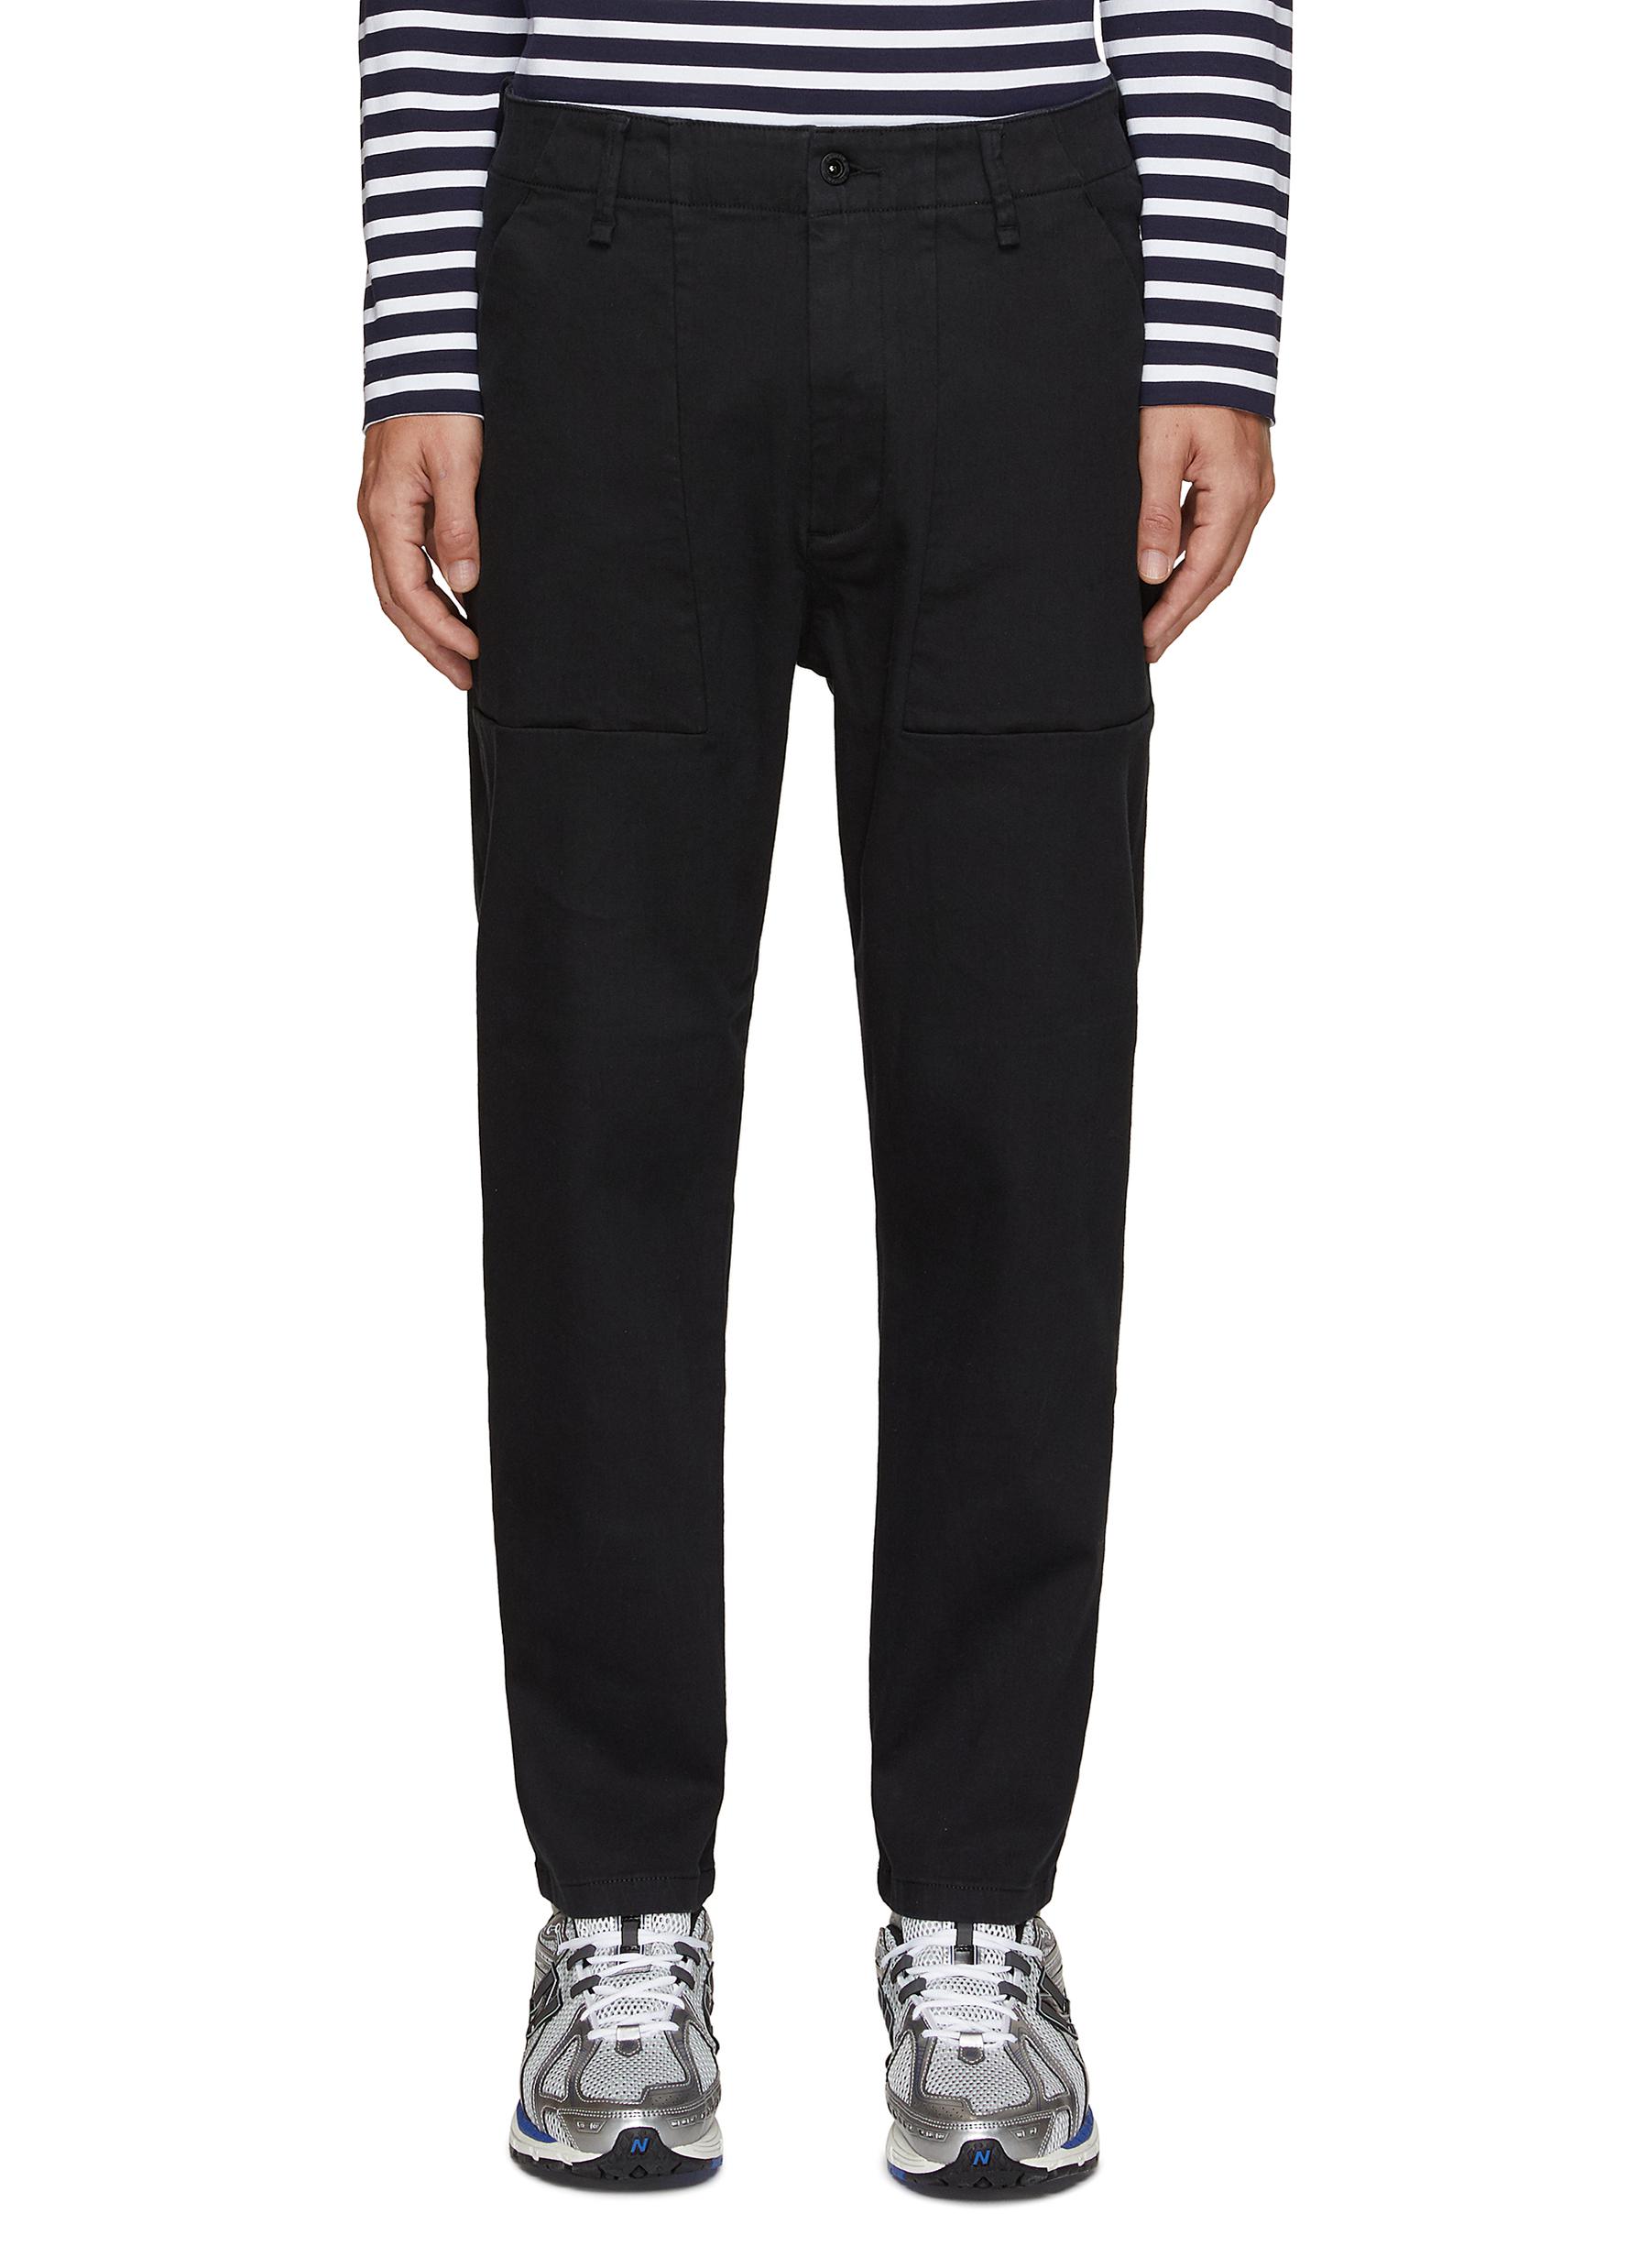 Fatigue Tapered Pants